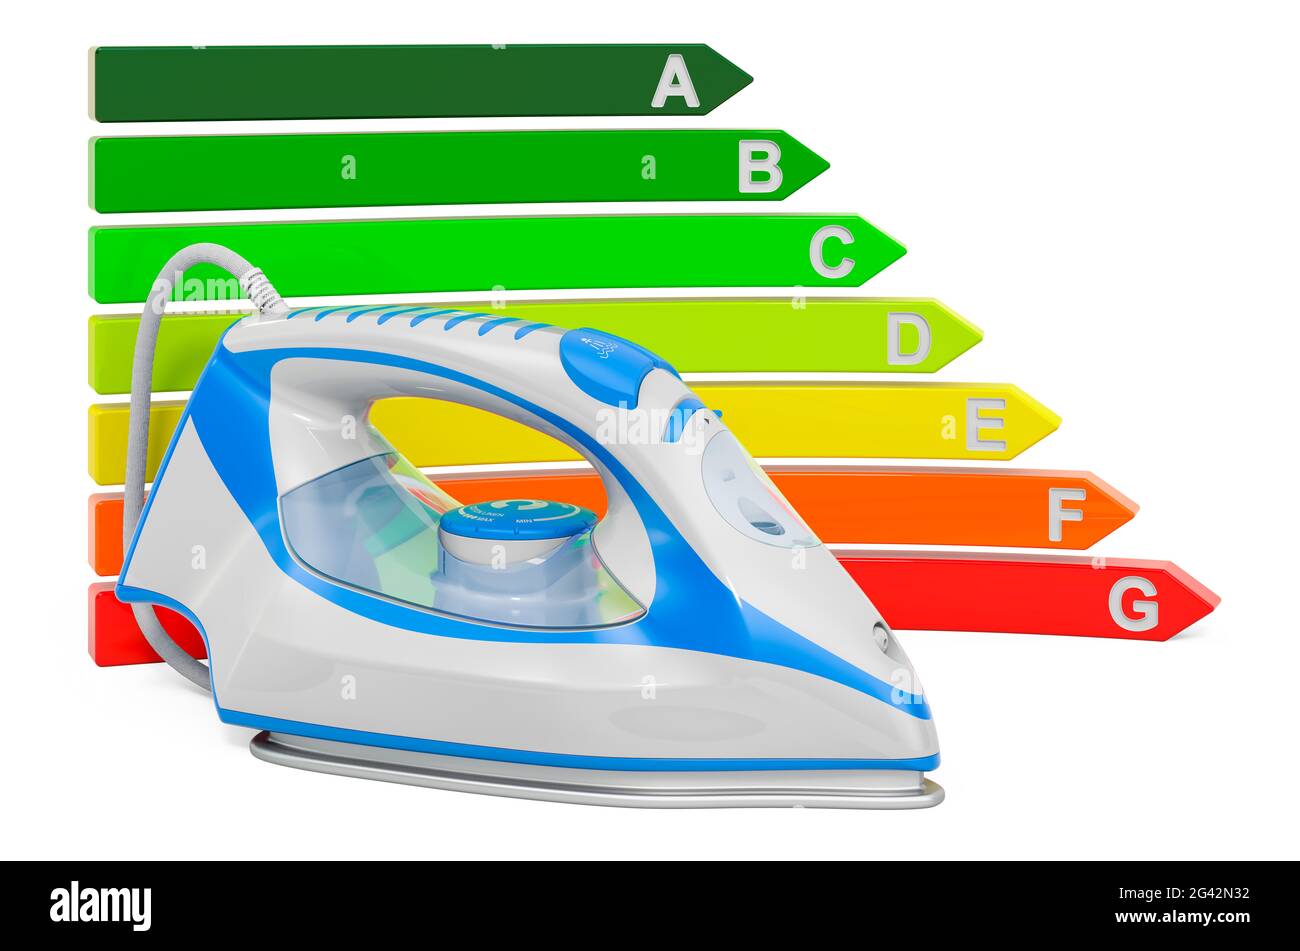 Electric steam iron with energy efficiency chart, 3D rendering isolated on  white background Stock Photo - Alamy